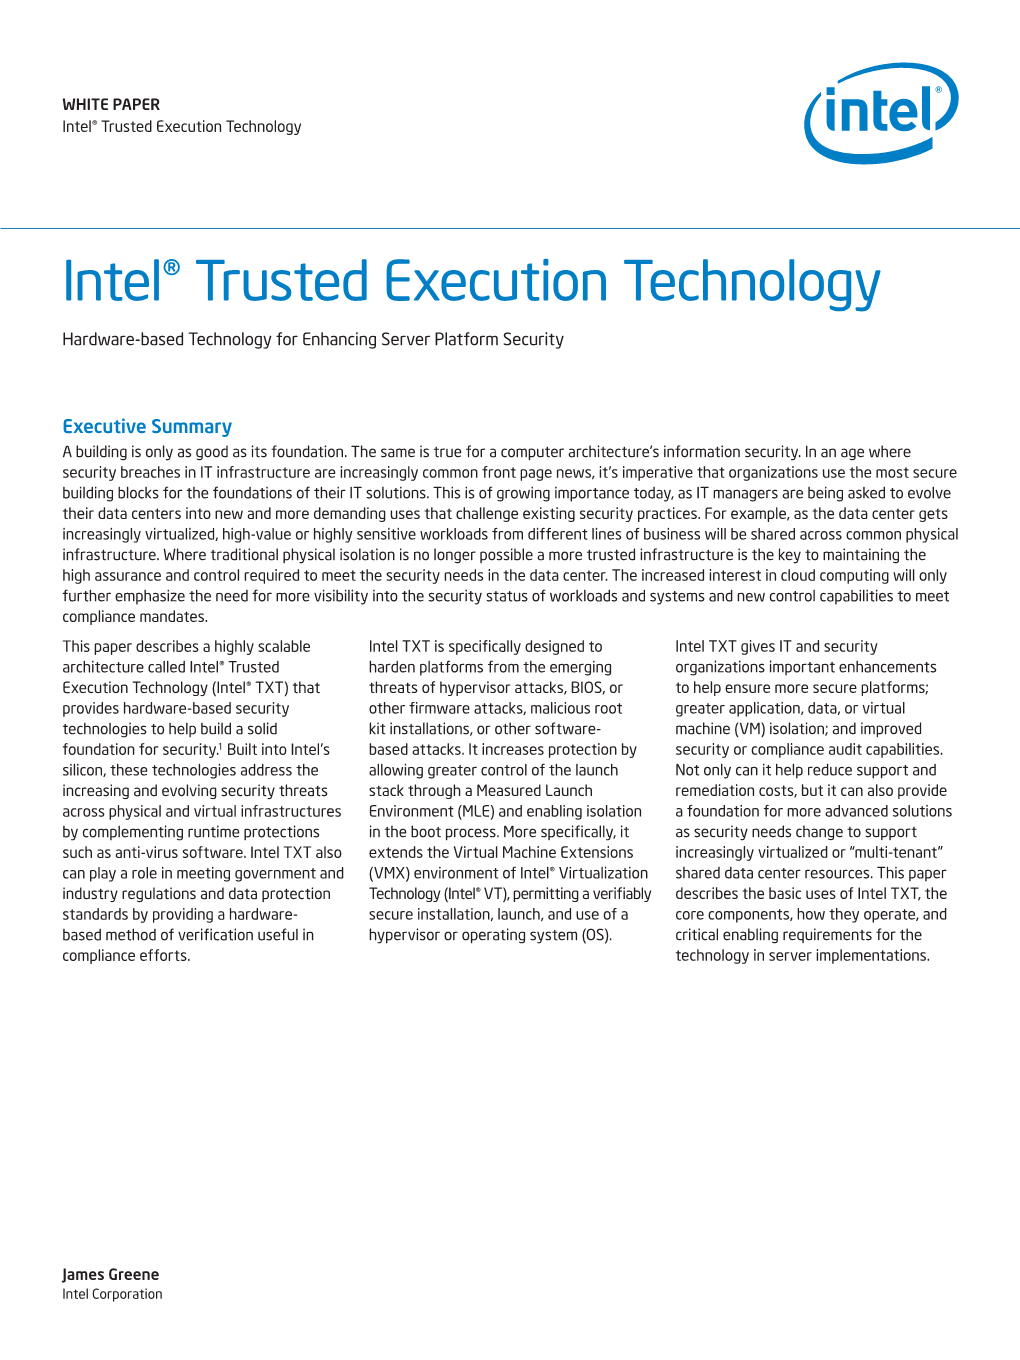 Intel® Trusted Execution Technology Hardware-Based Technology For